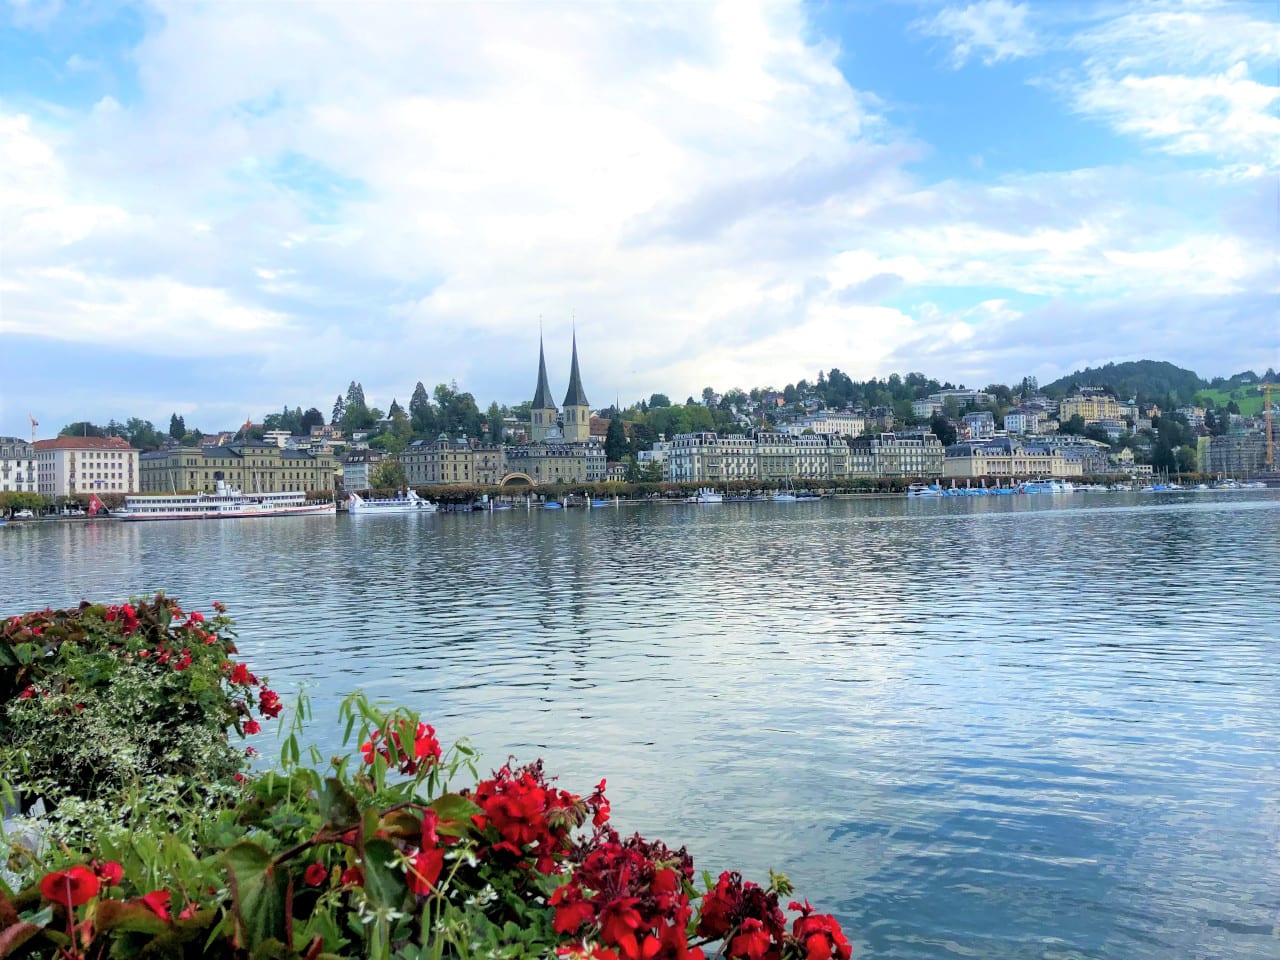 Insider's guide to Lucerne, Switzerland: the best things to do in Lucerne, restaurants, accommodation options, and tips - Earth's Attractions - travel guides by locals, travel itineraries, travel tips, and more